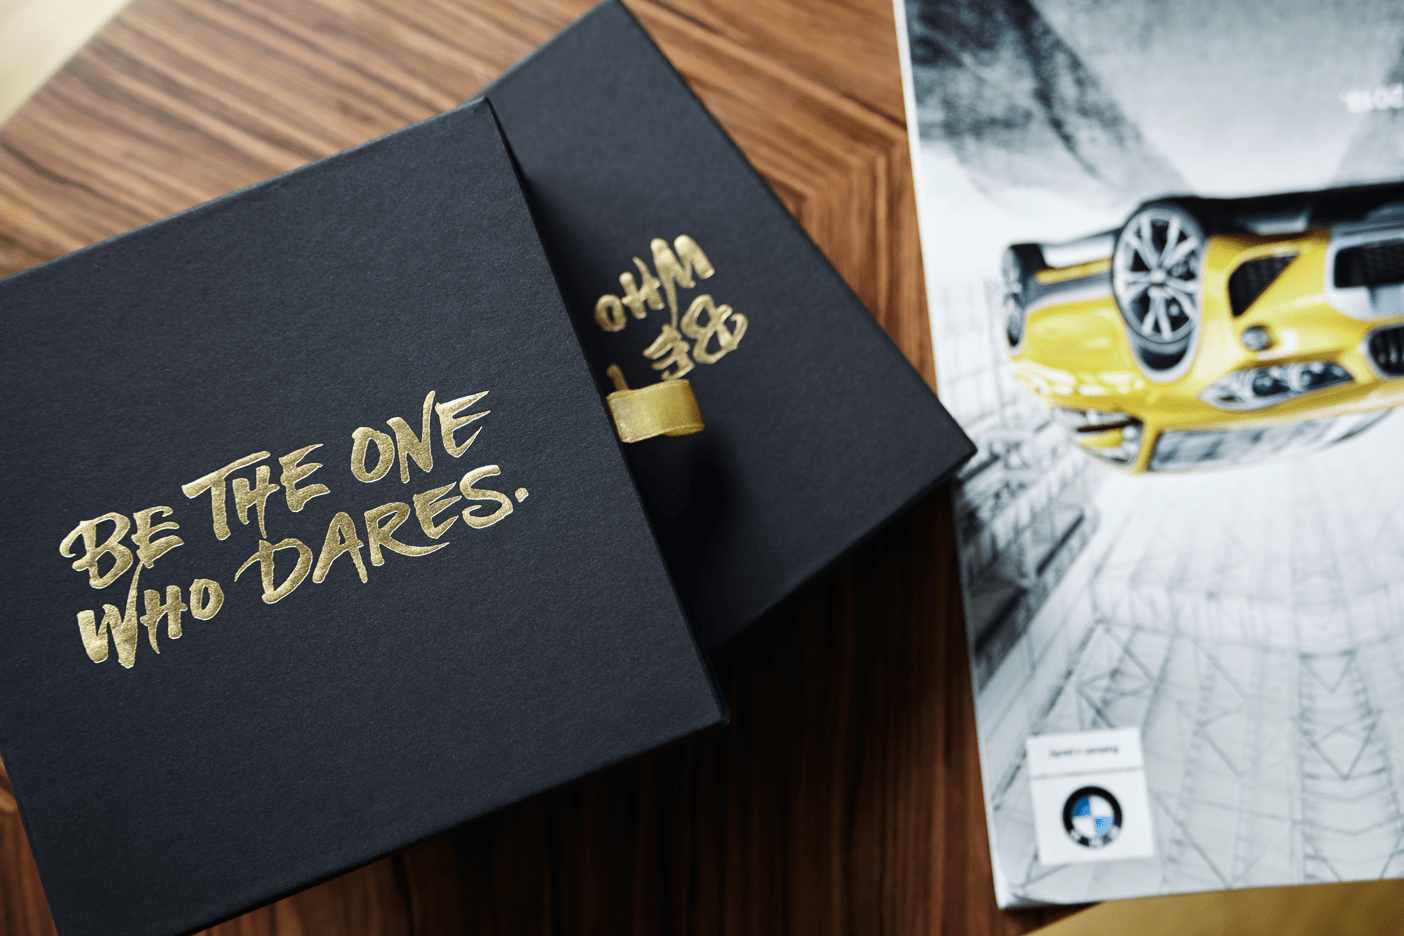 Be the one who dares - package design